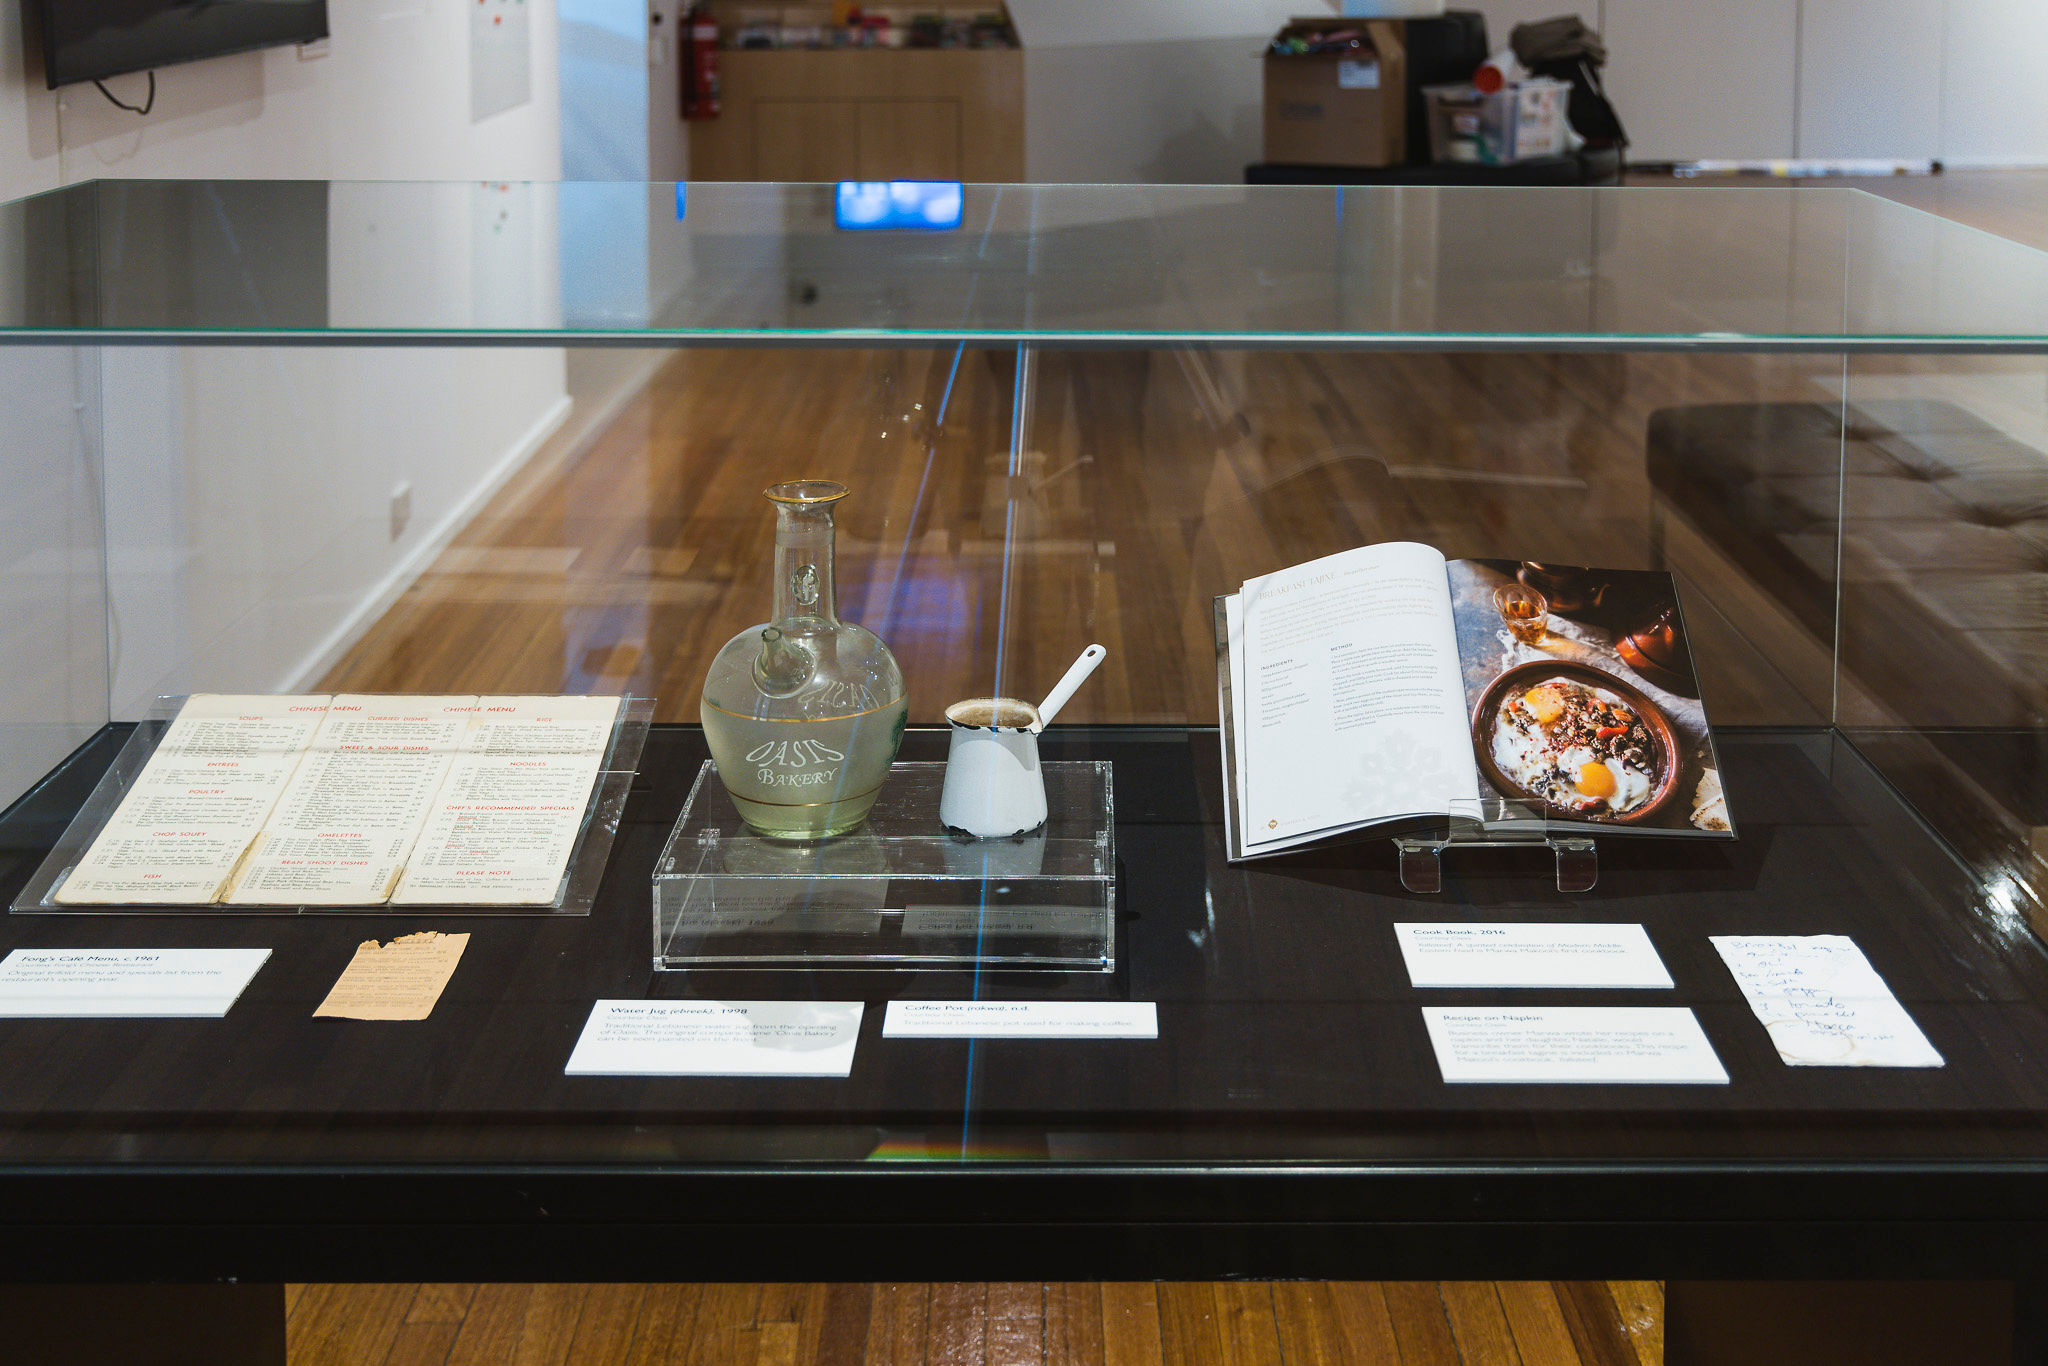 Local recipes on display in museum